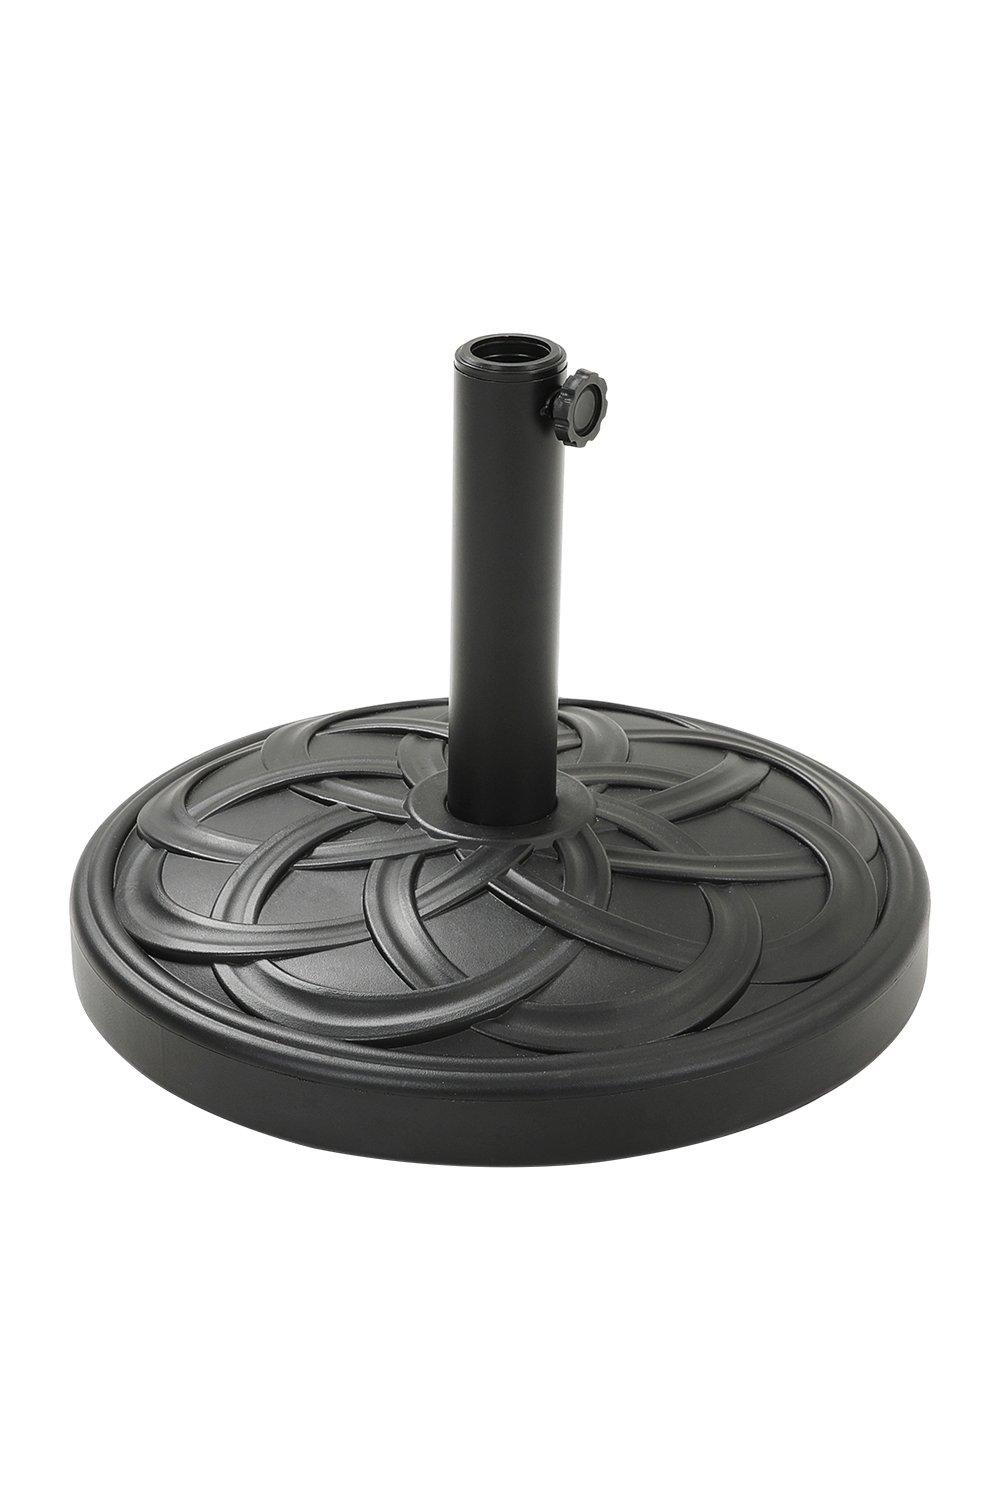 Free Standing Concrete-Filled Patio Umbrella Stand